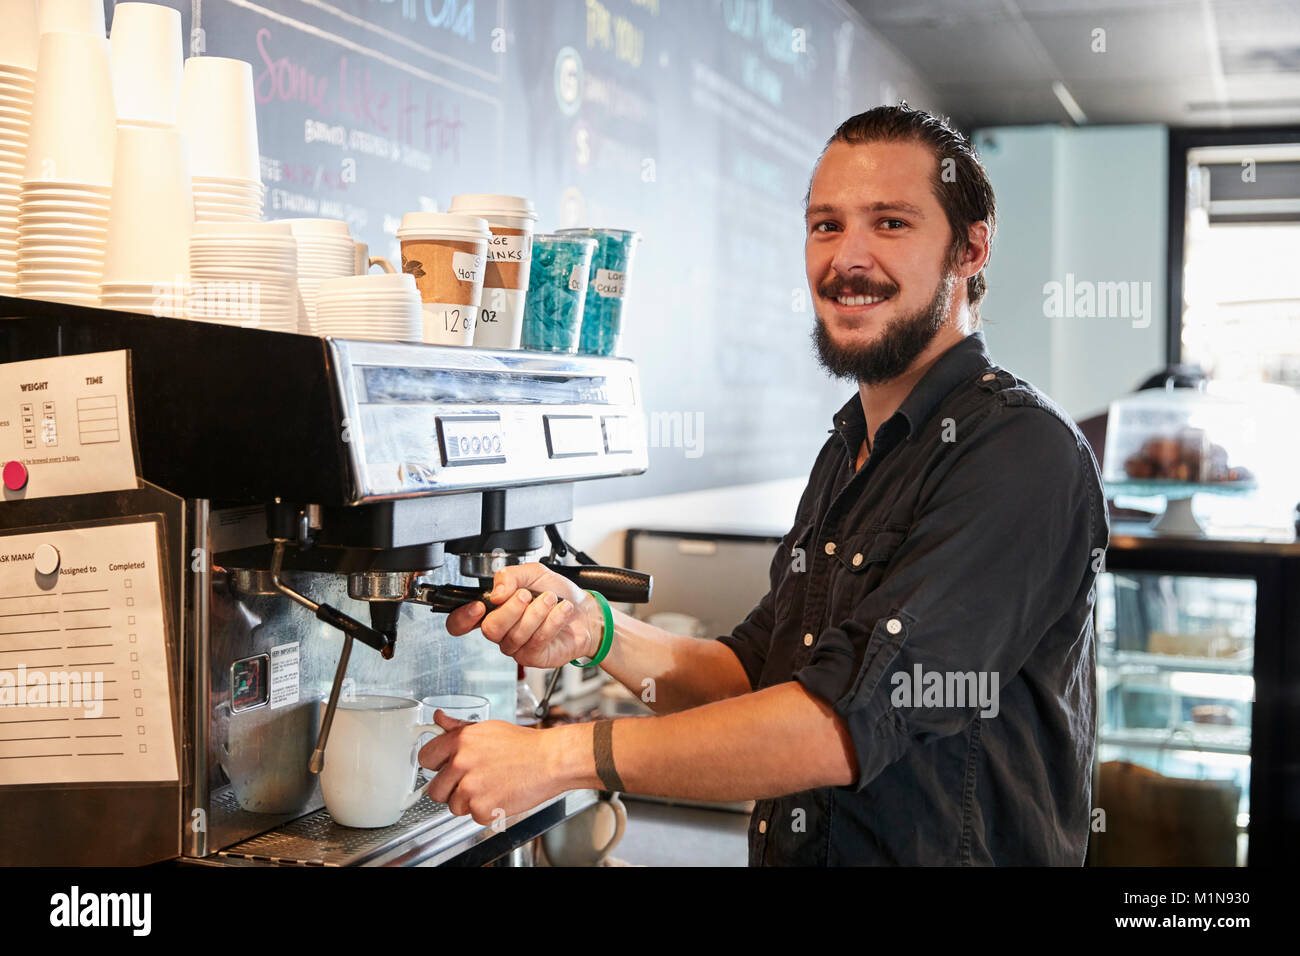 Portrait Of Male Barista Behind Counter In Coffee Shop Stock Photo